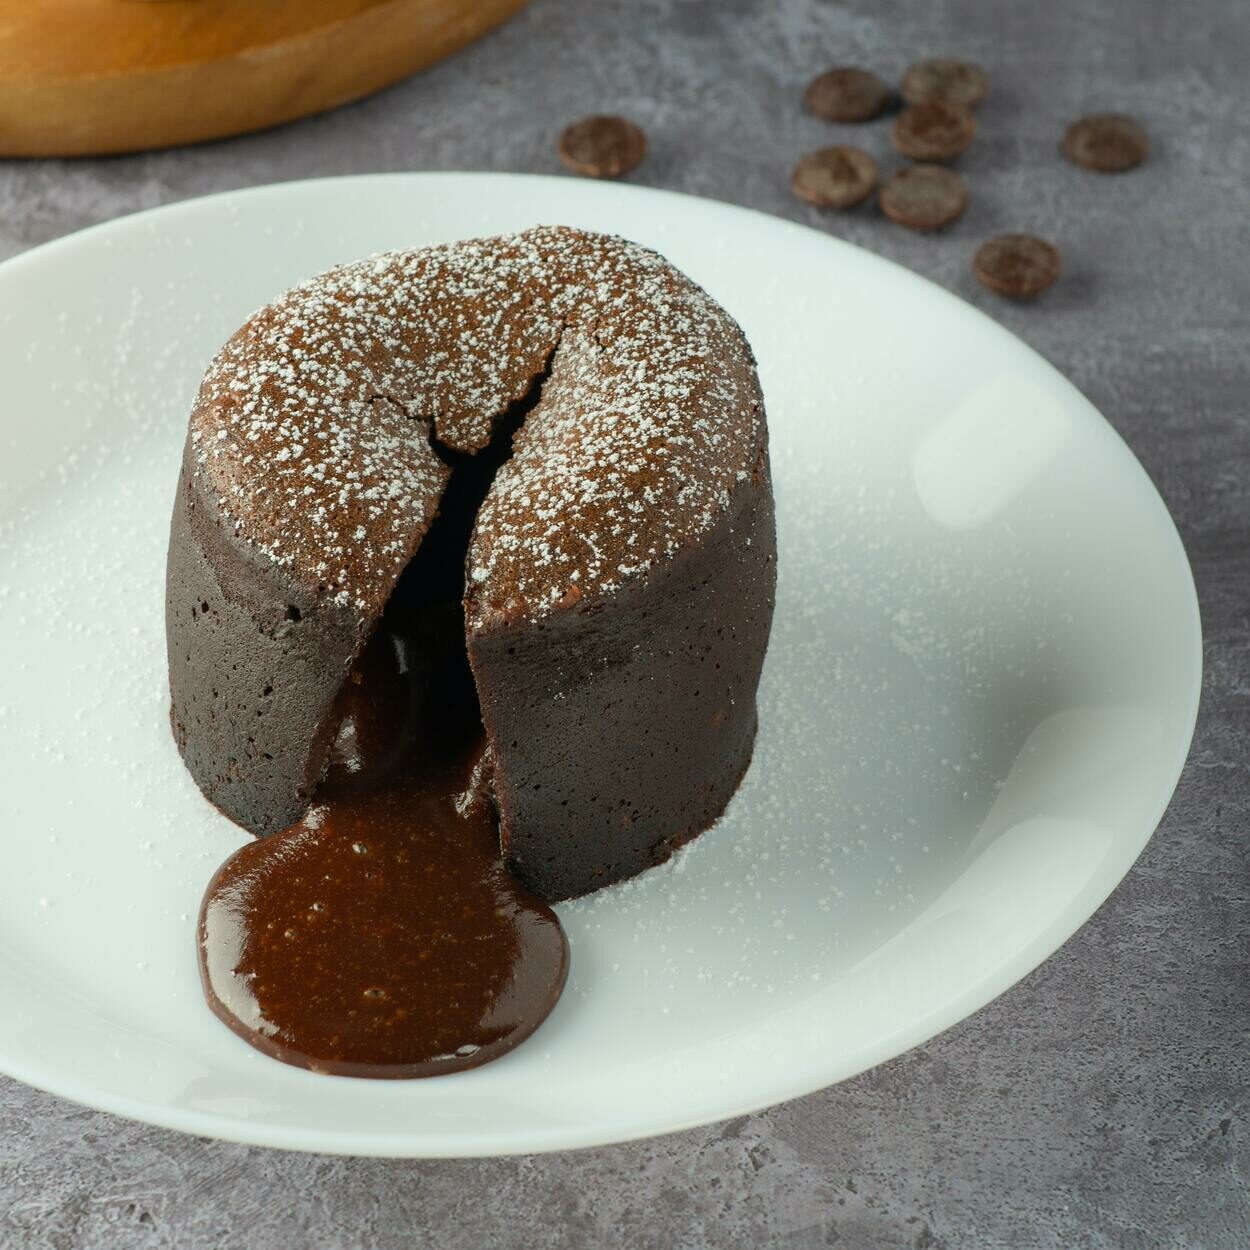 Ozing chocolate from a lava cake 